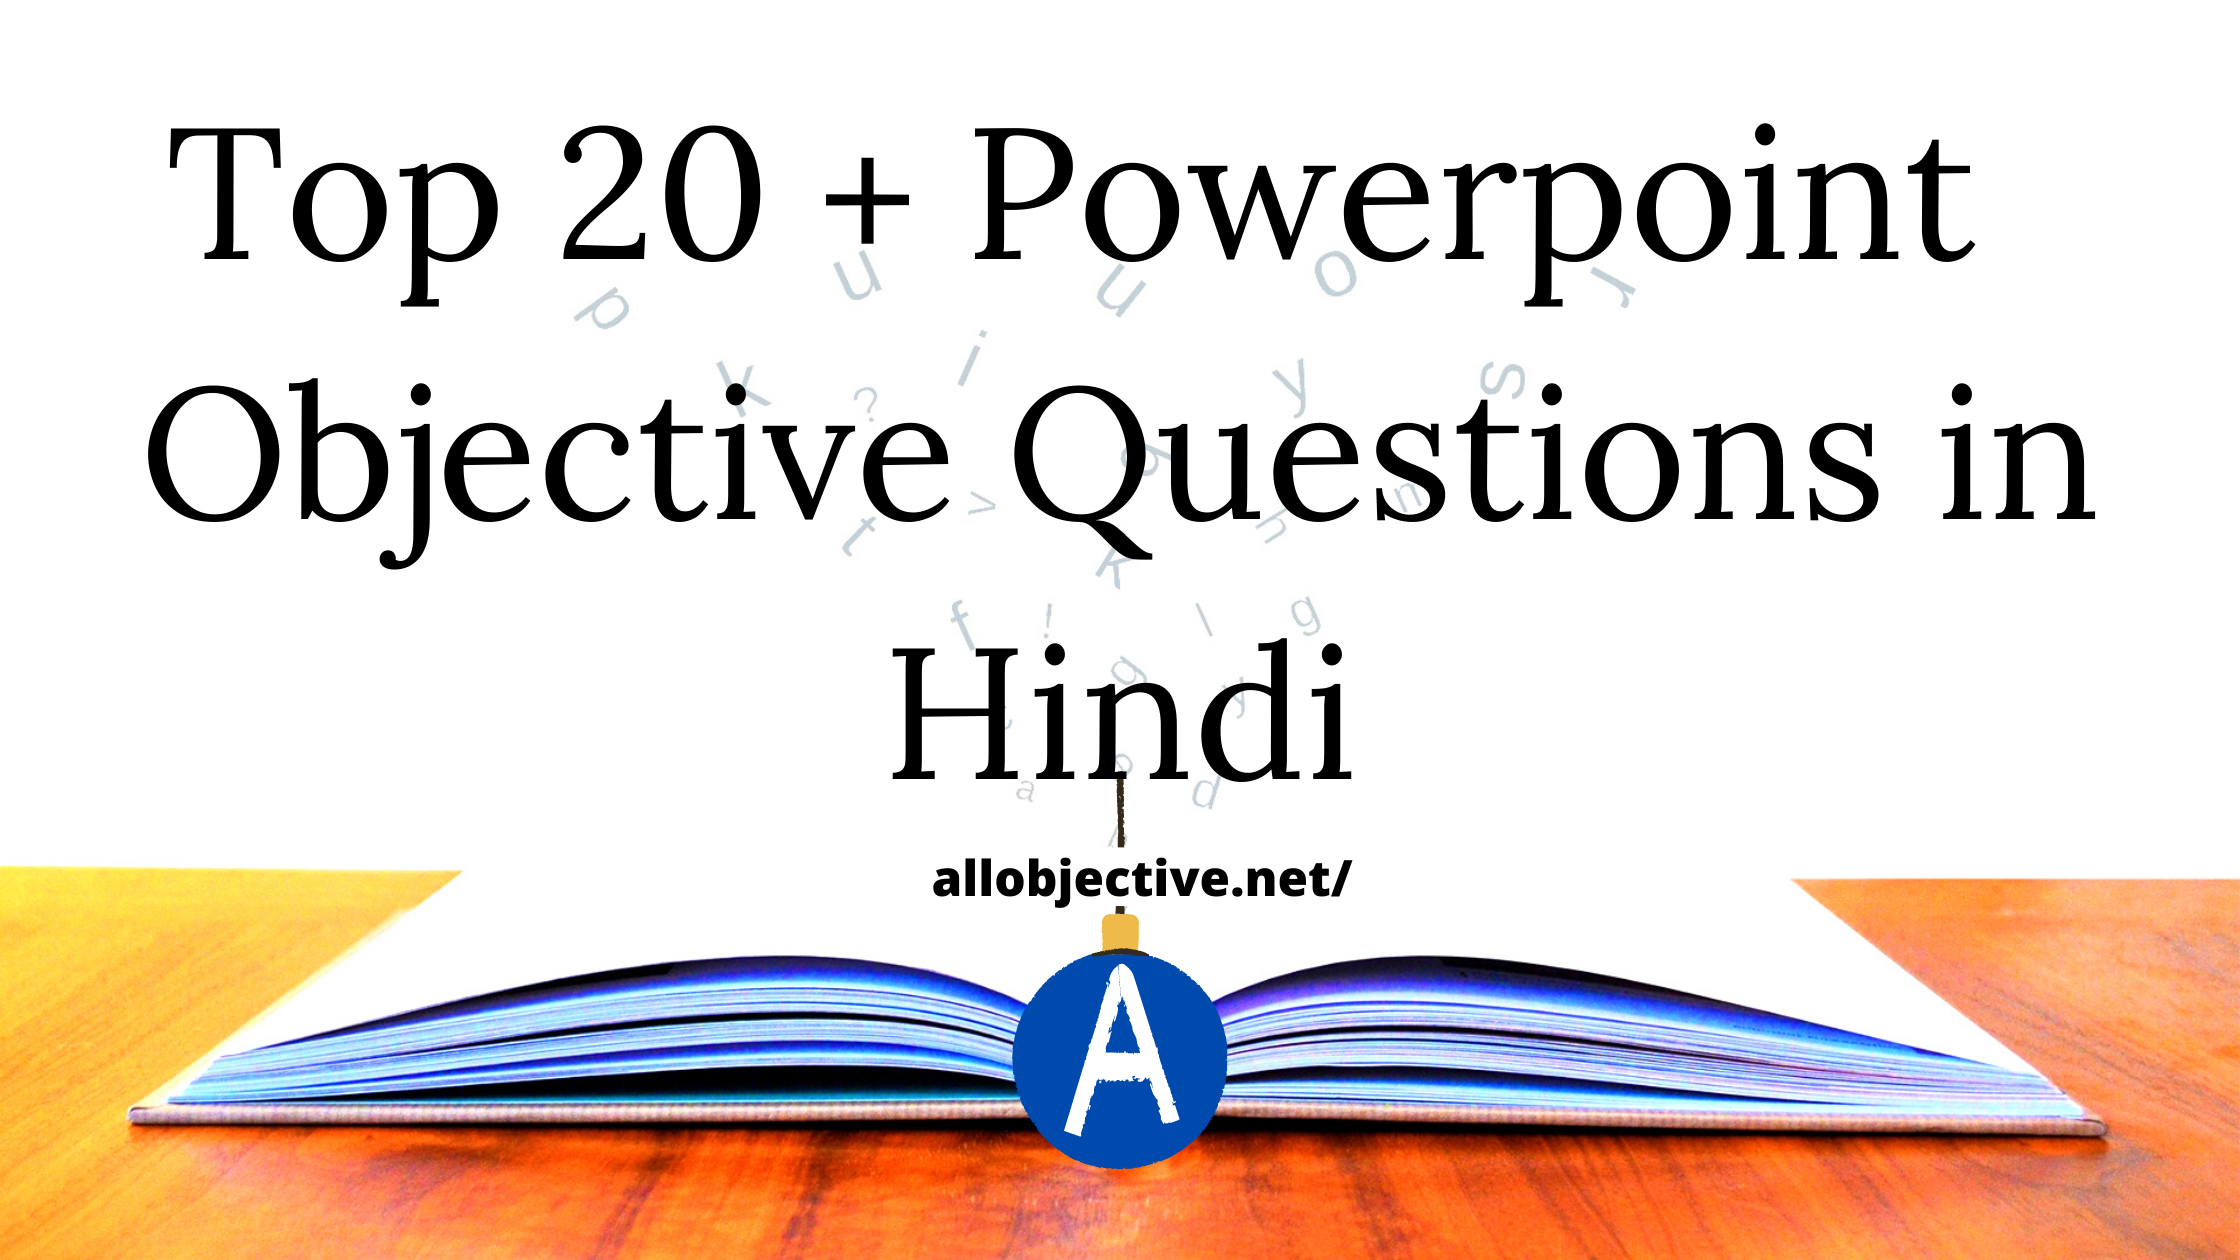 Powerpoint Objective Questions in Hindi